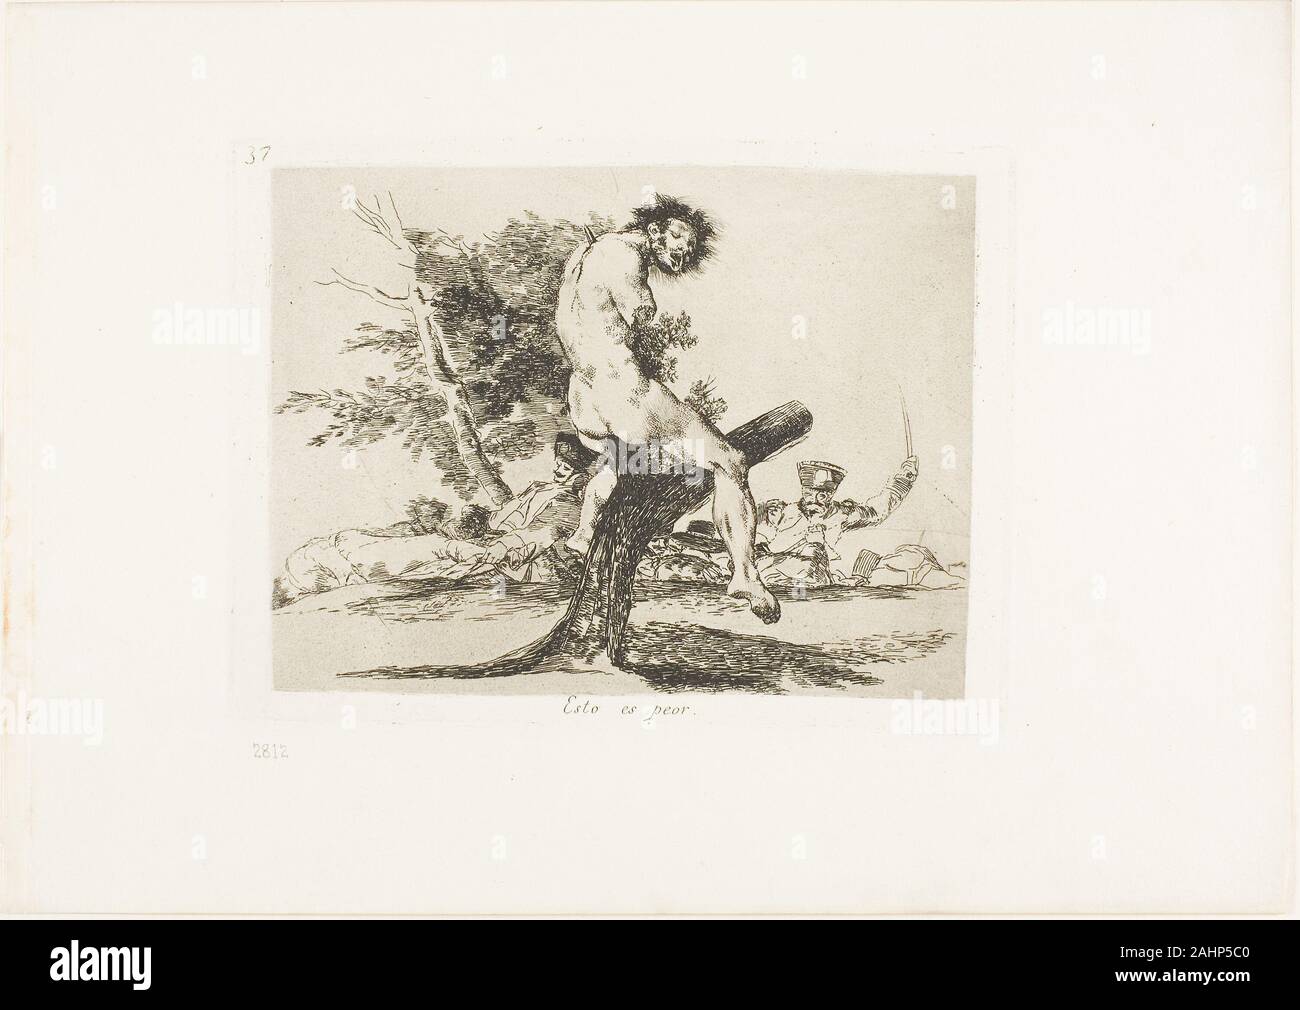 Francisco José de Goya y Lucientes. This is Worse, plate 37 from The Disasters of War. 1812–1815. Spain. Etching, lavis and drypoint on ivory wove paper with gilt edges Ever-increasing violence is on display in this horrific scene. A trial proof of this print bears the inscription, “The one at Chinchón,” suggesting that the artist witnessed this scene of human barbarity. Stock Photo